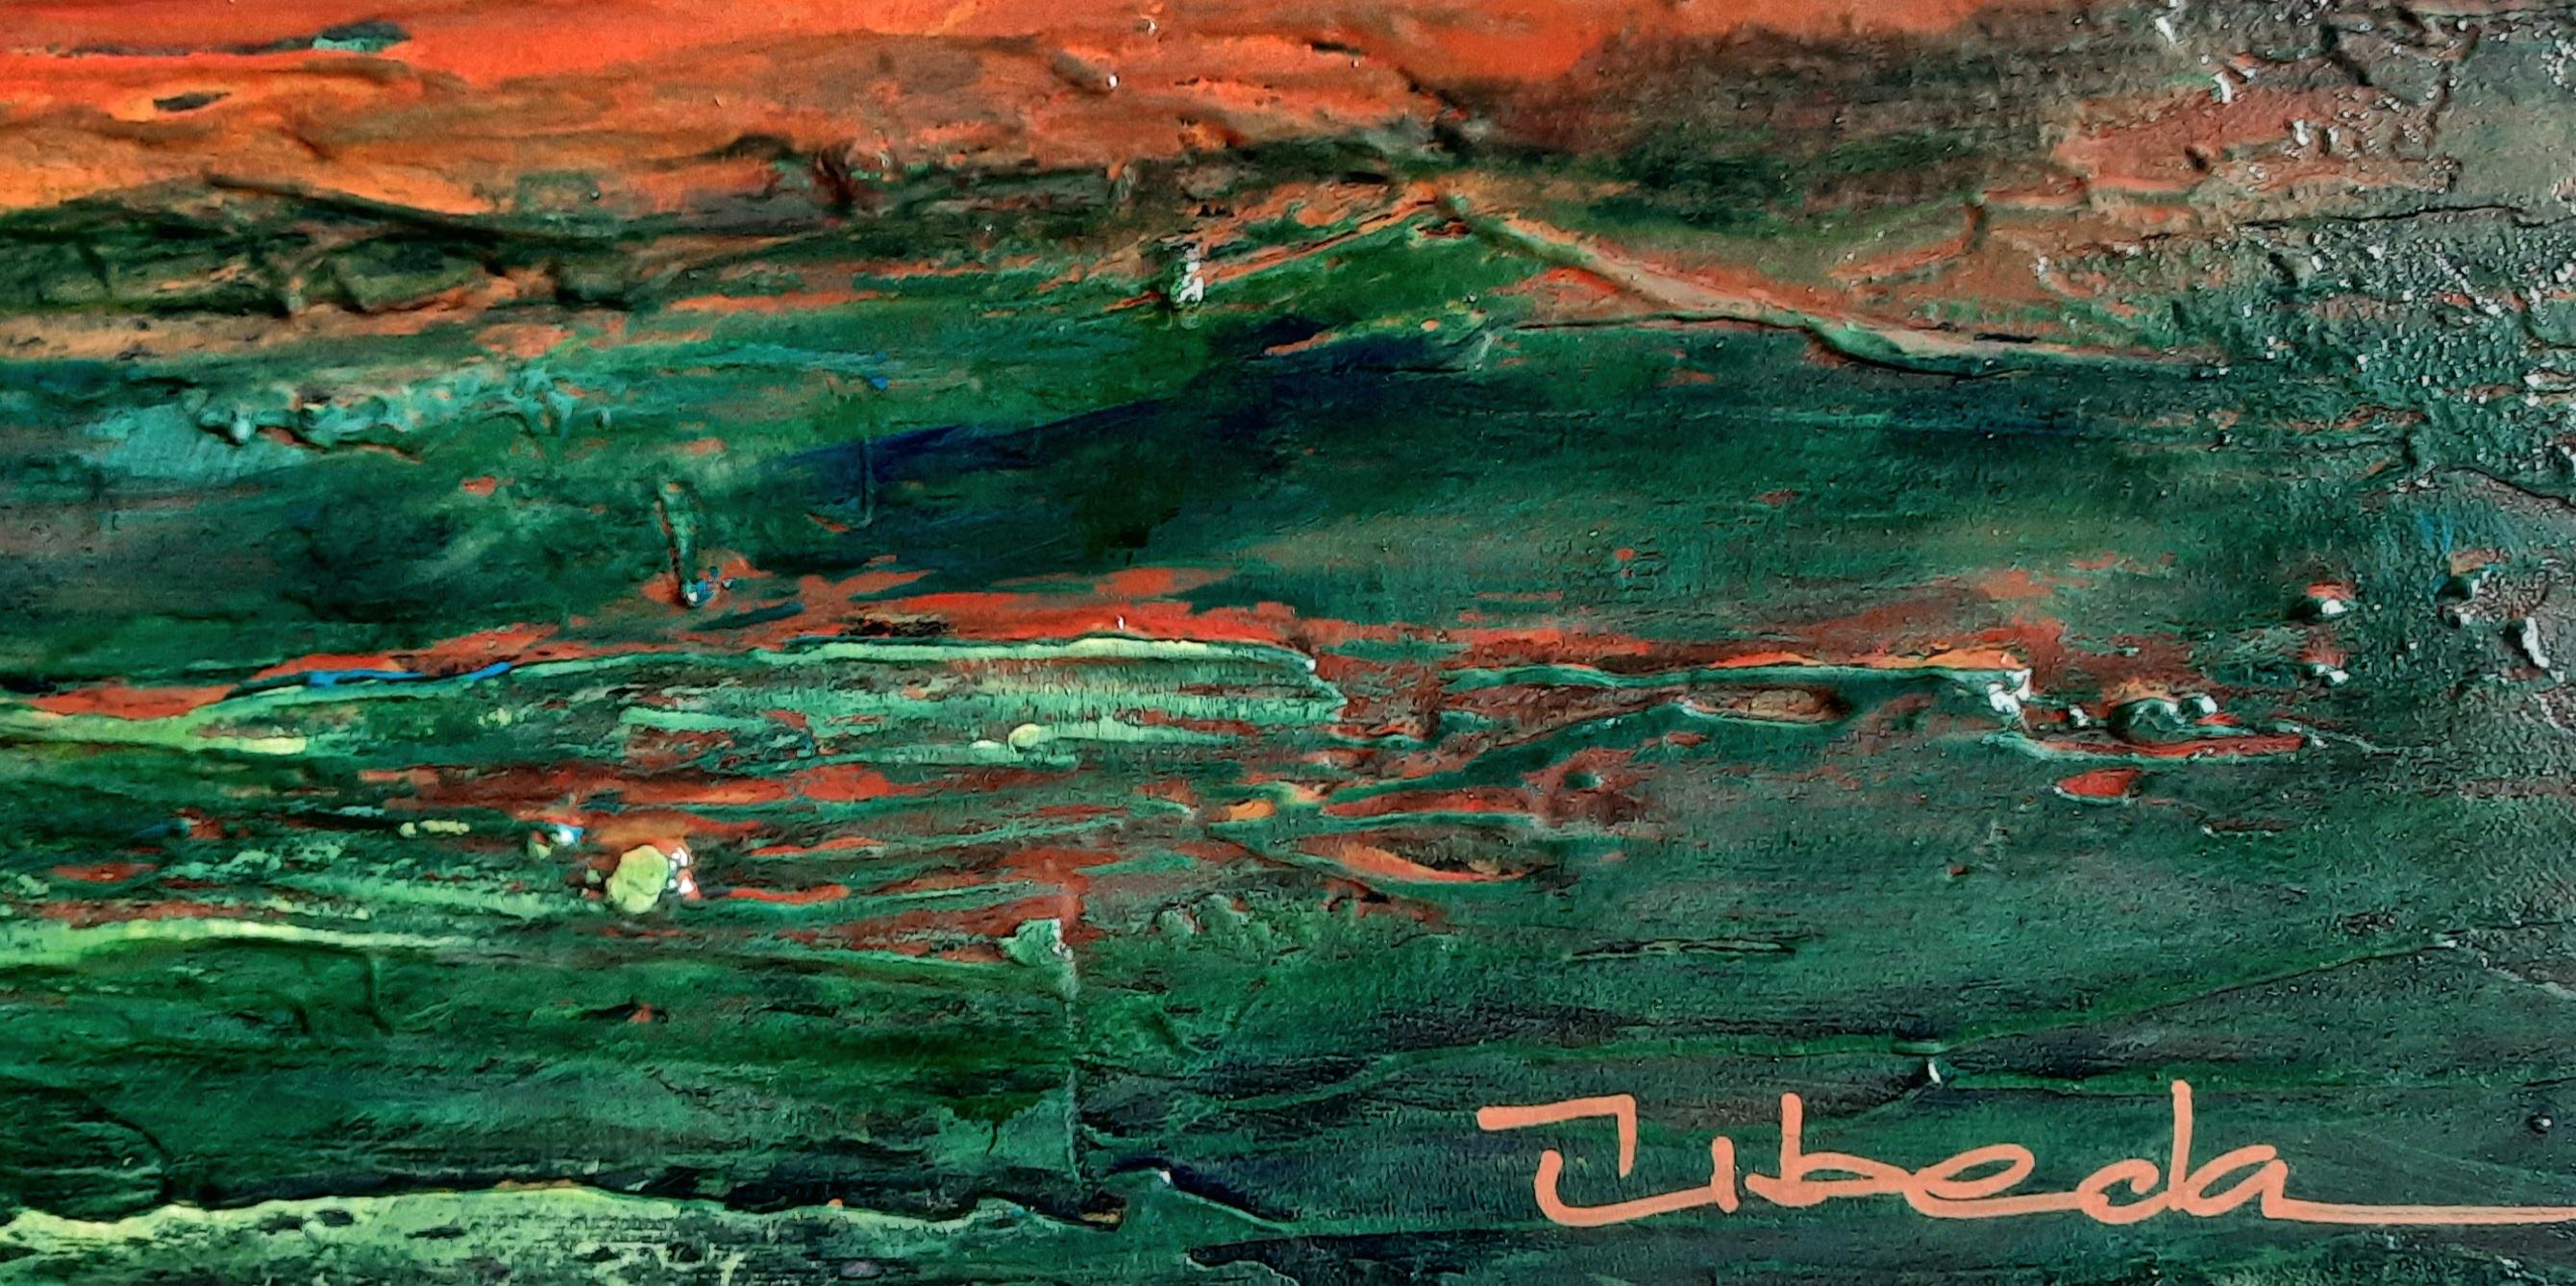 Breakage in amaranth. Abstract impressionist landscape. Blue-green-orange colors - Painting by Ángel Luis Úbeda